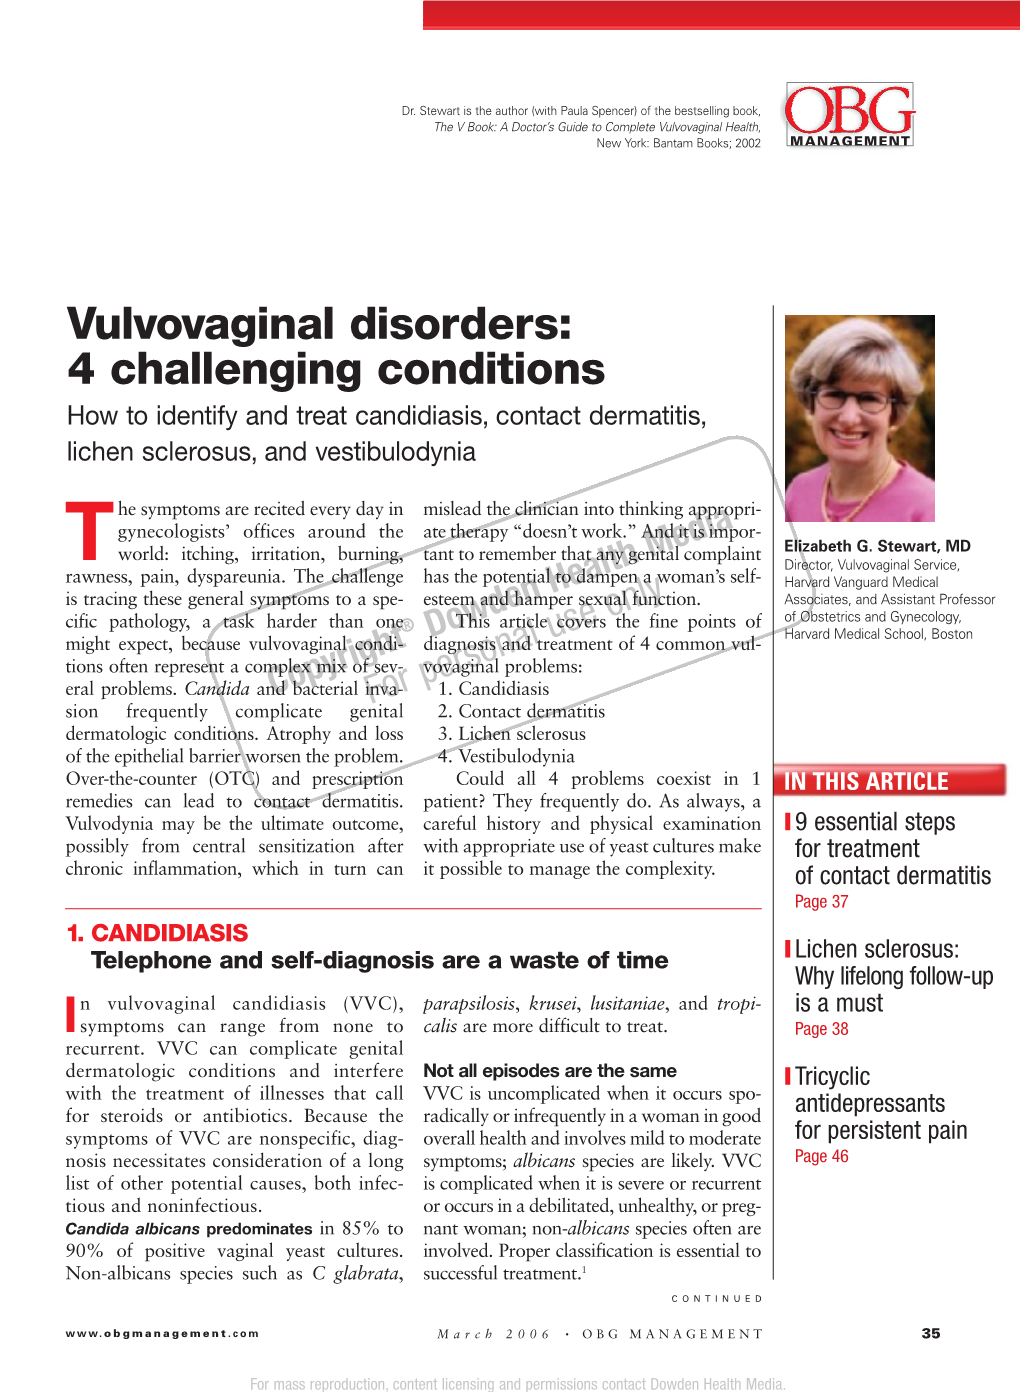 Vulvovaginal Disorders: 4 Challenging Conditions How to Identify and Treat Candidiasis, Contact Dermatitis, Lichen Sclerosus, and Vestibulodynia